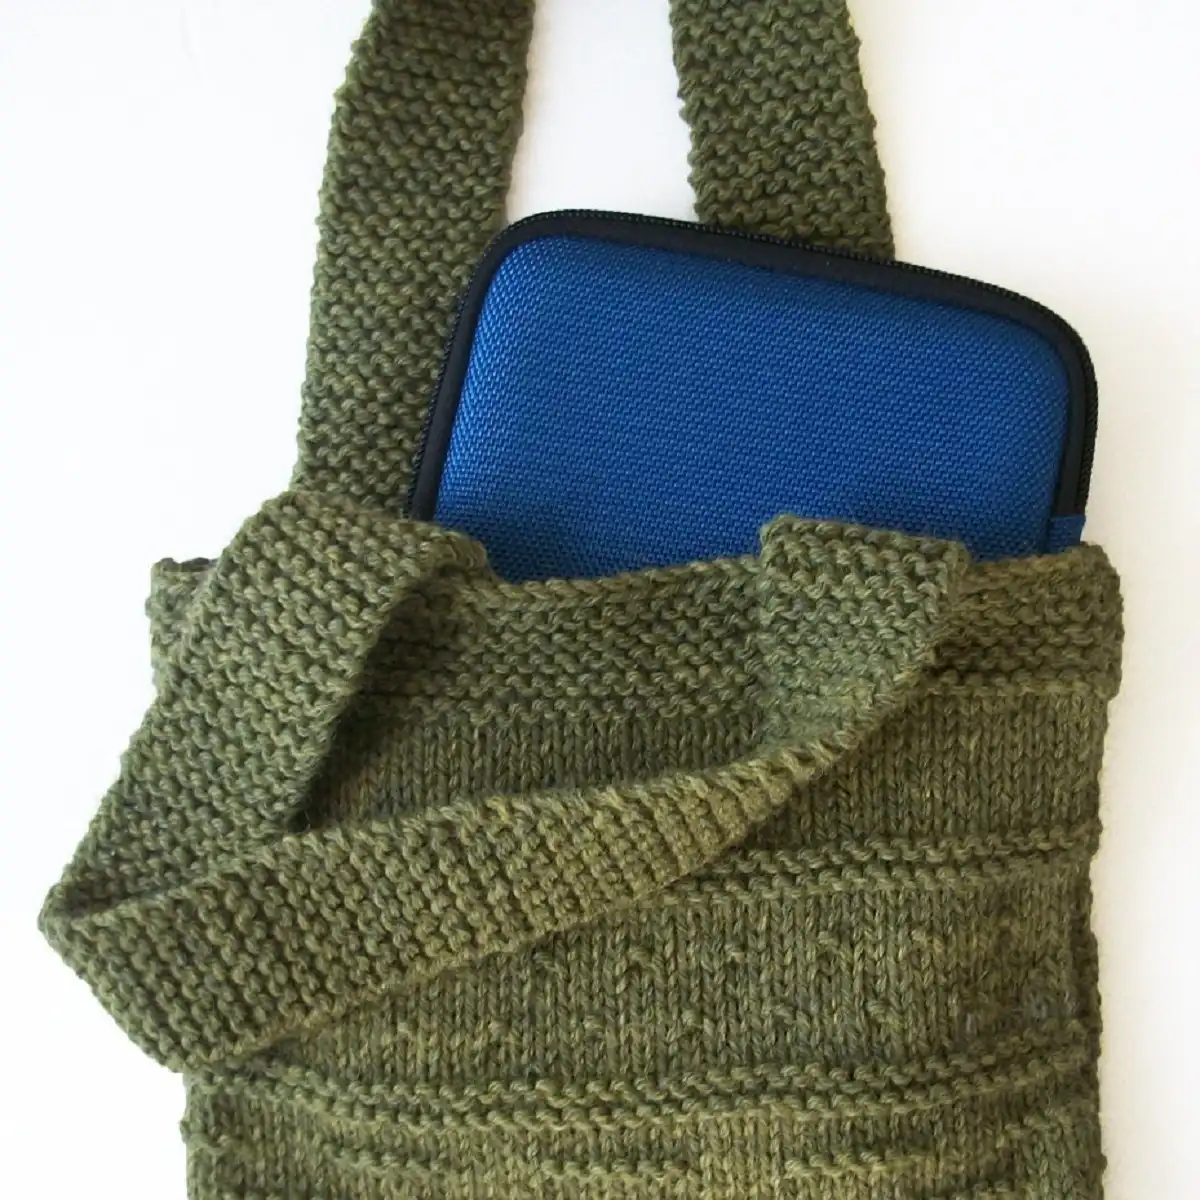 Knit And Purl Bag